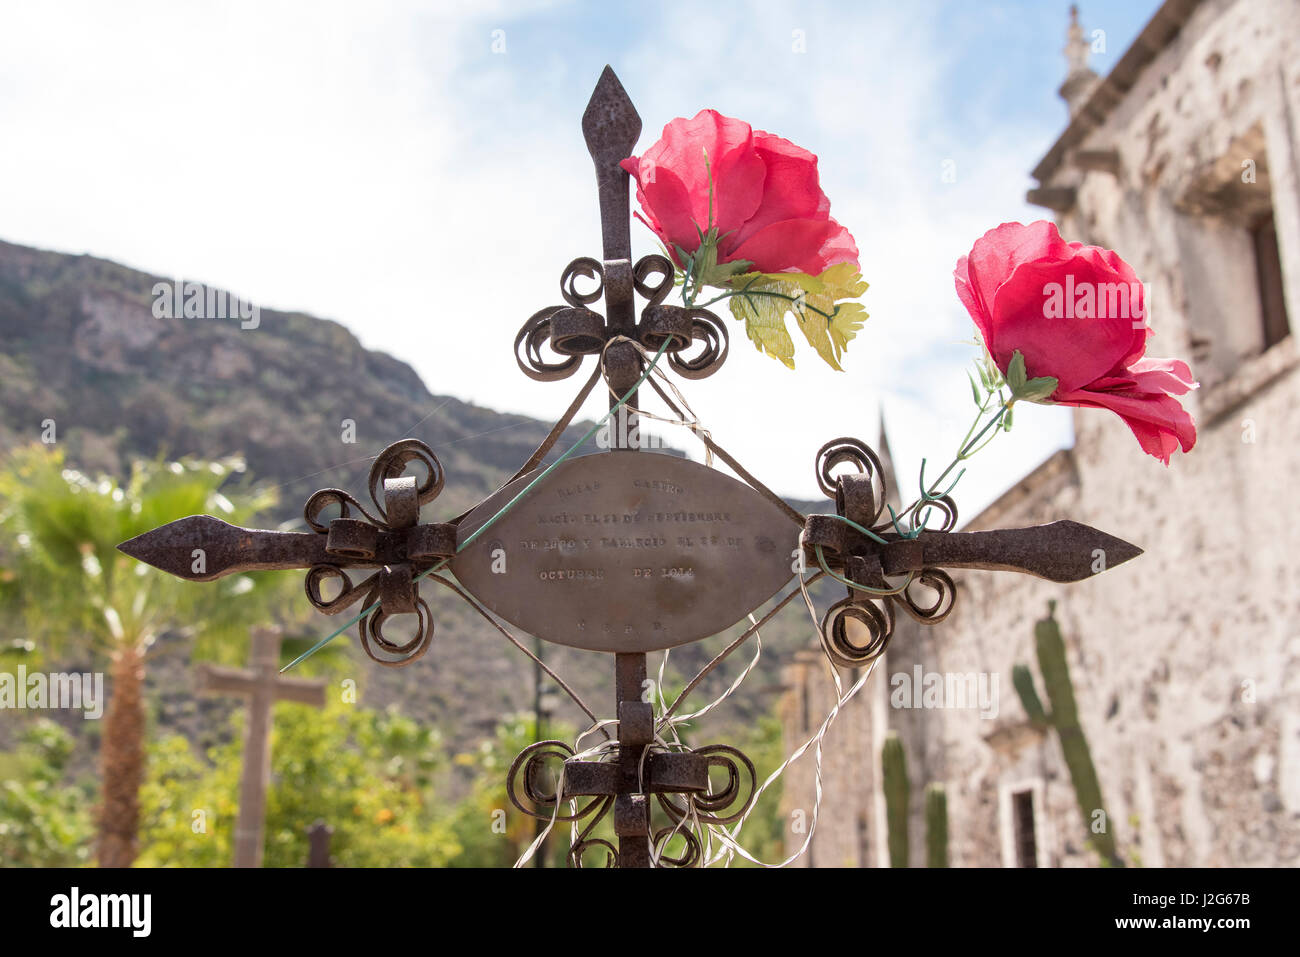 Mexico, Baja California Sur. Mission San Javier, Roman Catholic Jesuit. Founded 1699 closed 1817 Grave marker with iron work and flowers Stock Photo